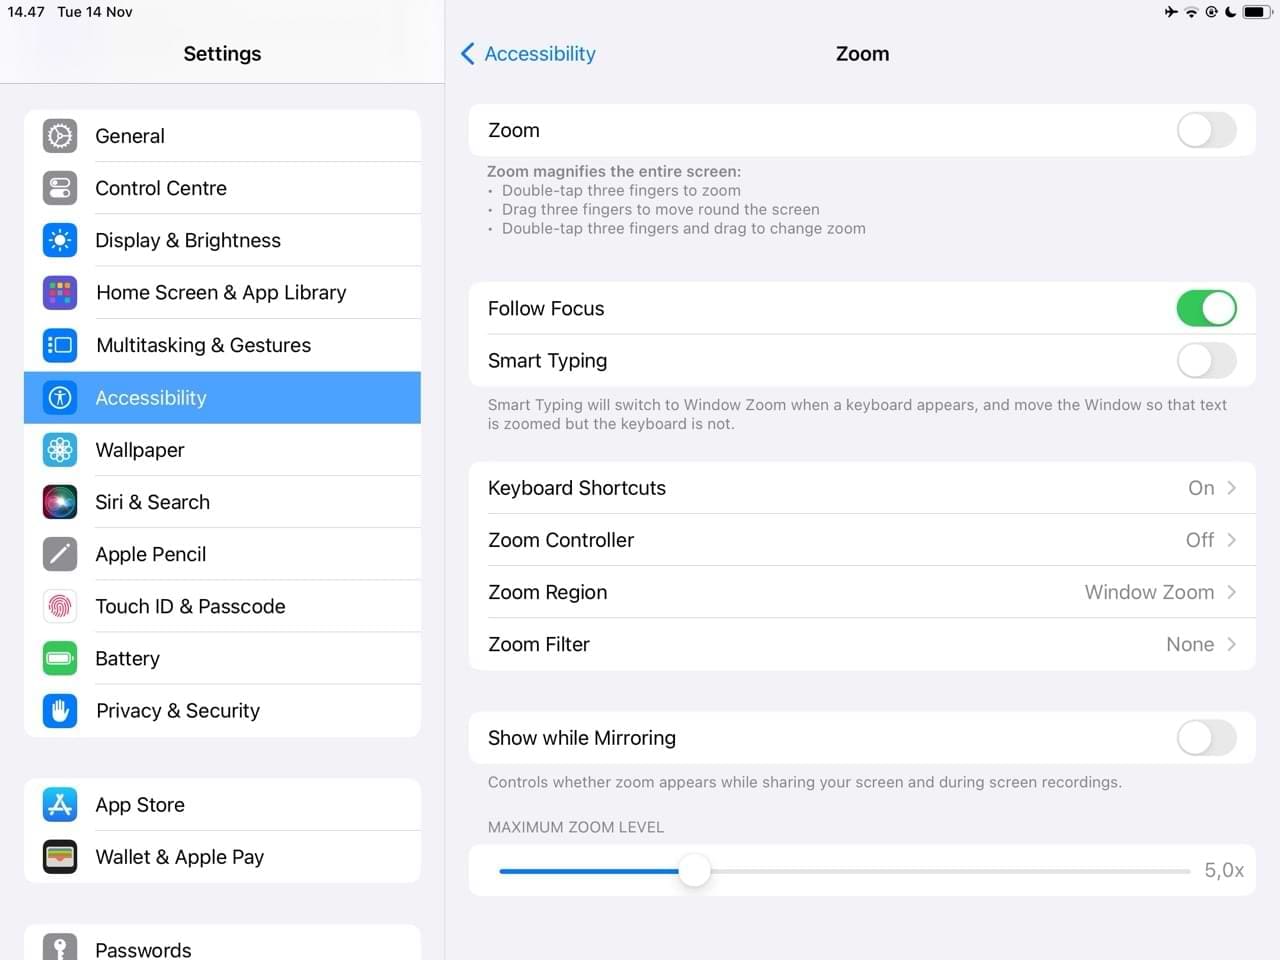 The Zoom Settings That Are Appearing on iPadOS